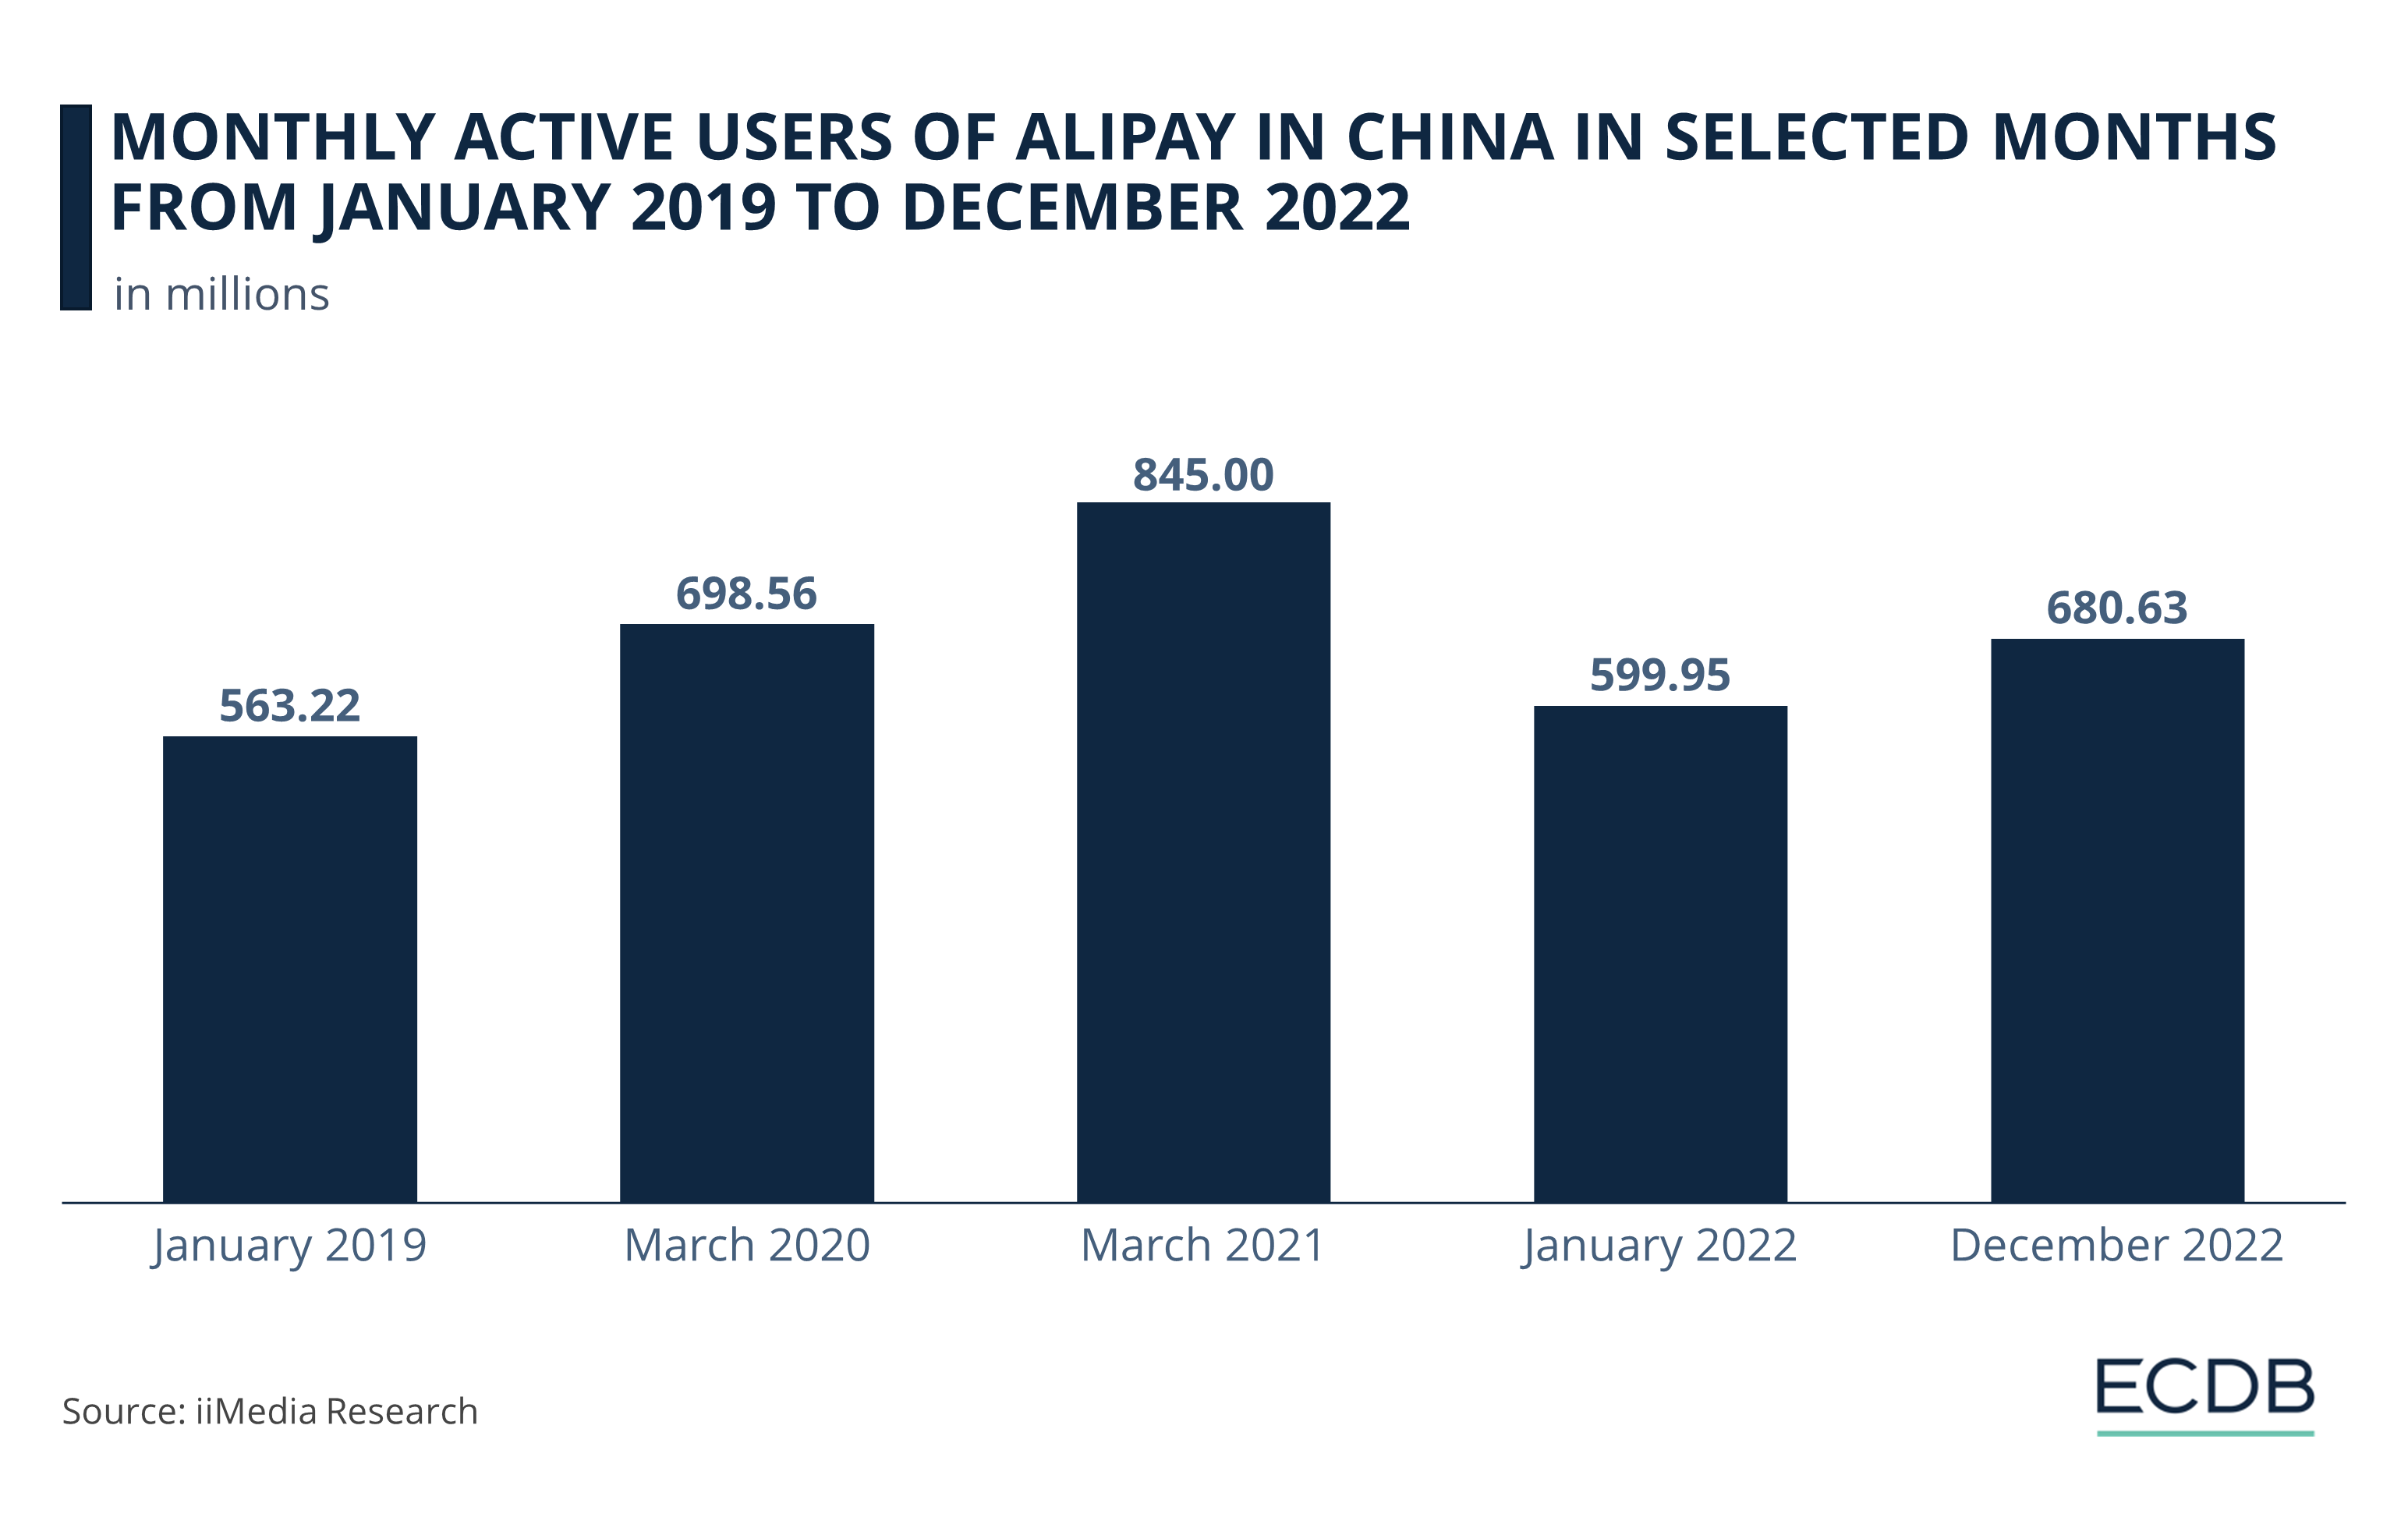 Monthly Active Users of Alipay in China in Selected Months From January 2019 to December 2022